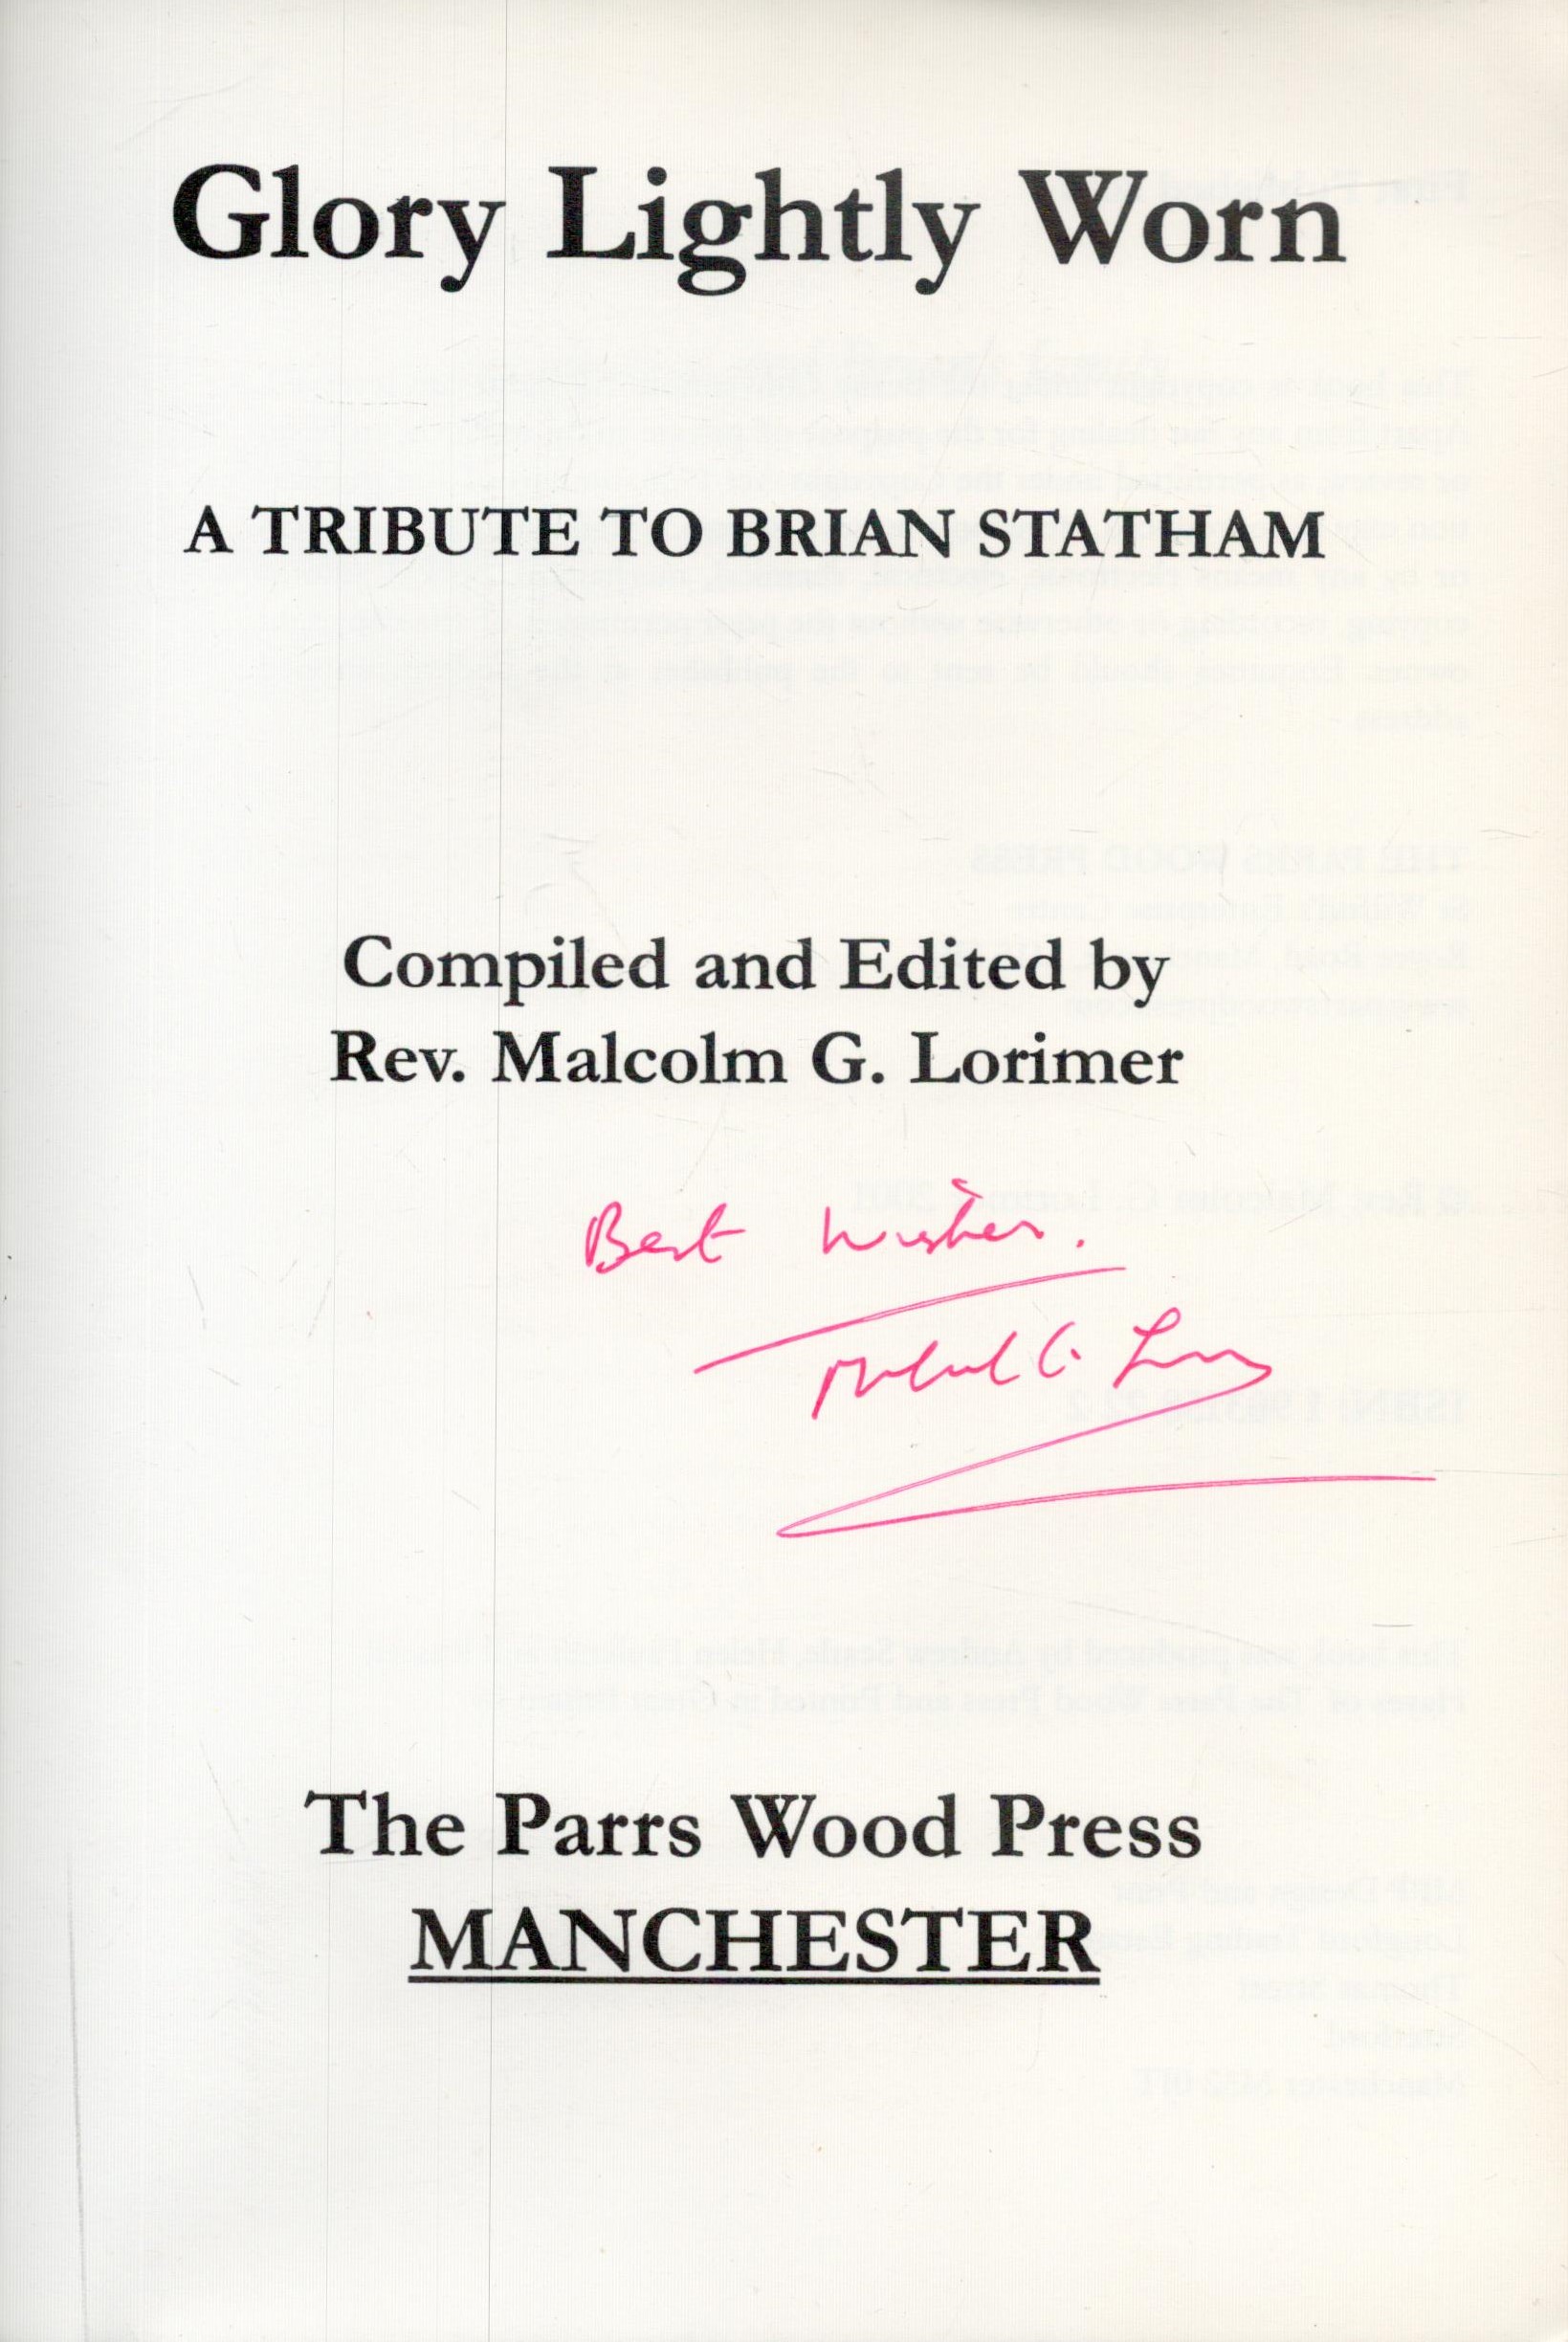 Rev Malcolm G Lorimer Signed Glory Lightly Worn- A Tribute to Brian Statham Paperback Book. Good - Image 2 of 3